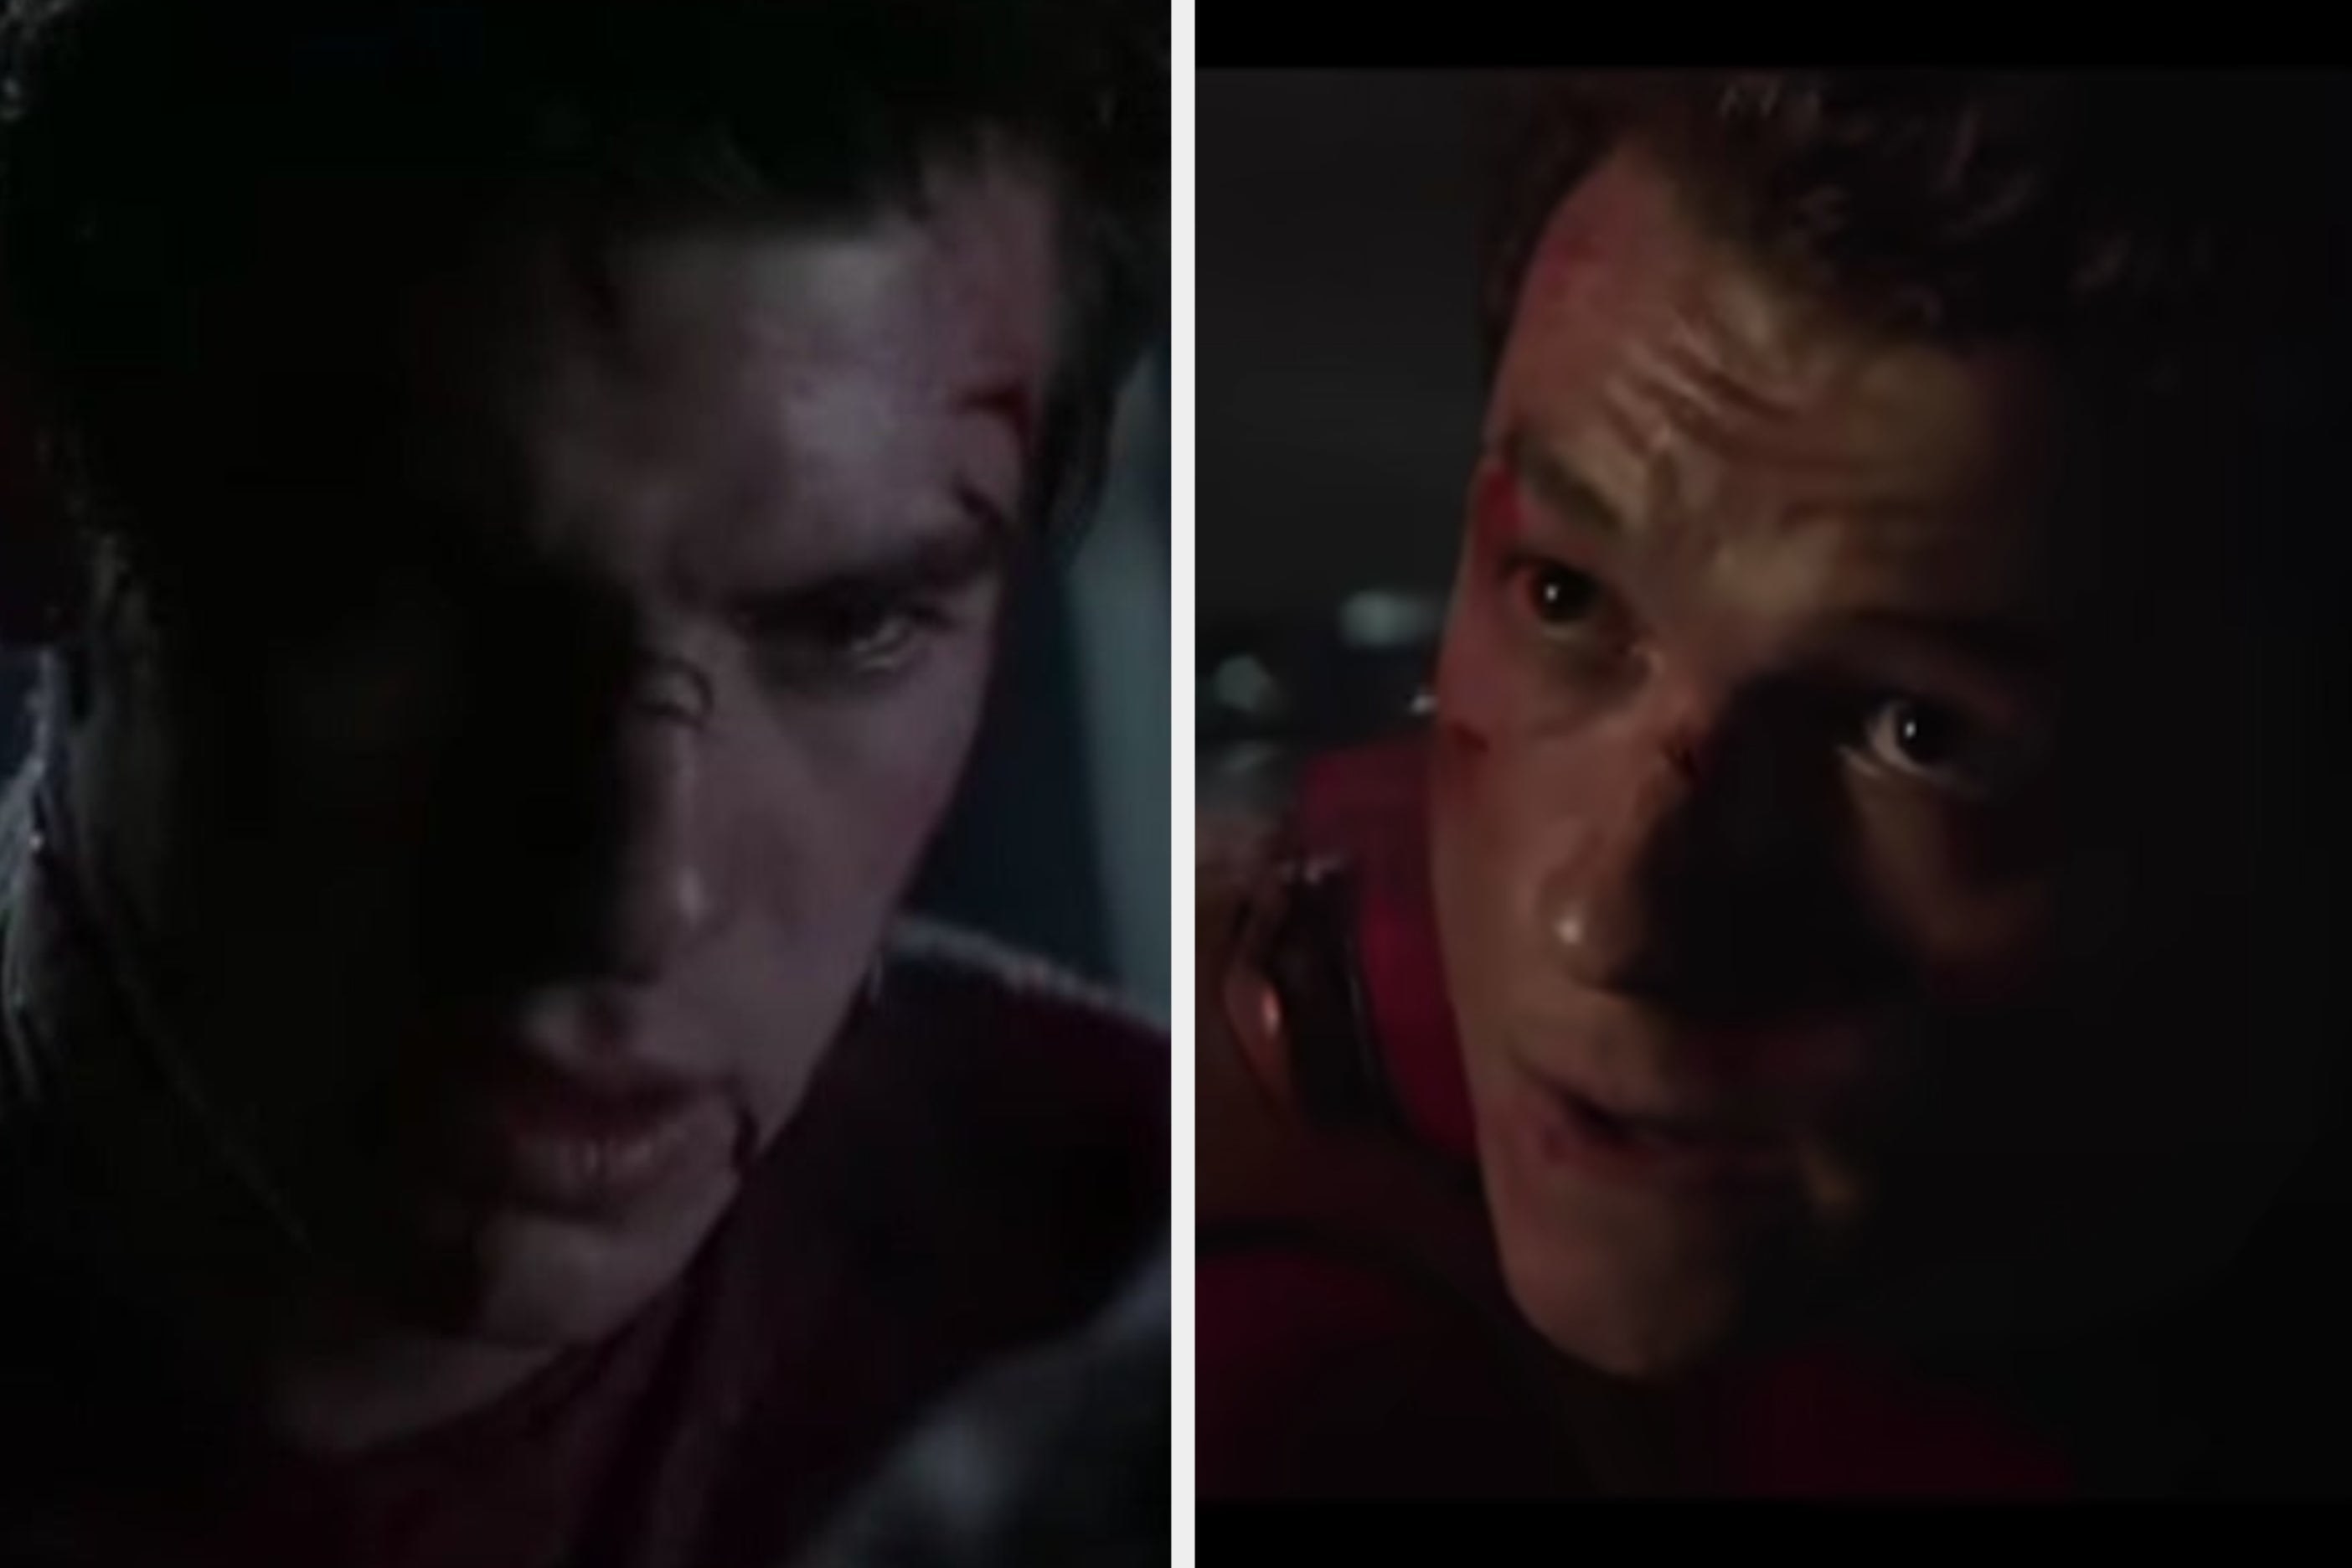 Peter with cuts on his face in &quot;The Amazing Spider-Man&quot;/Peter with blood on his face in &quot;Spider-Man: No Way Home&quot;